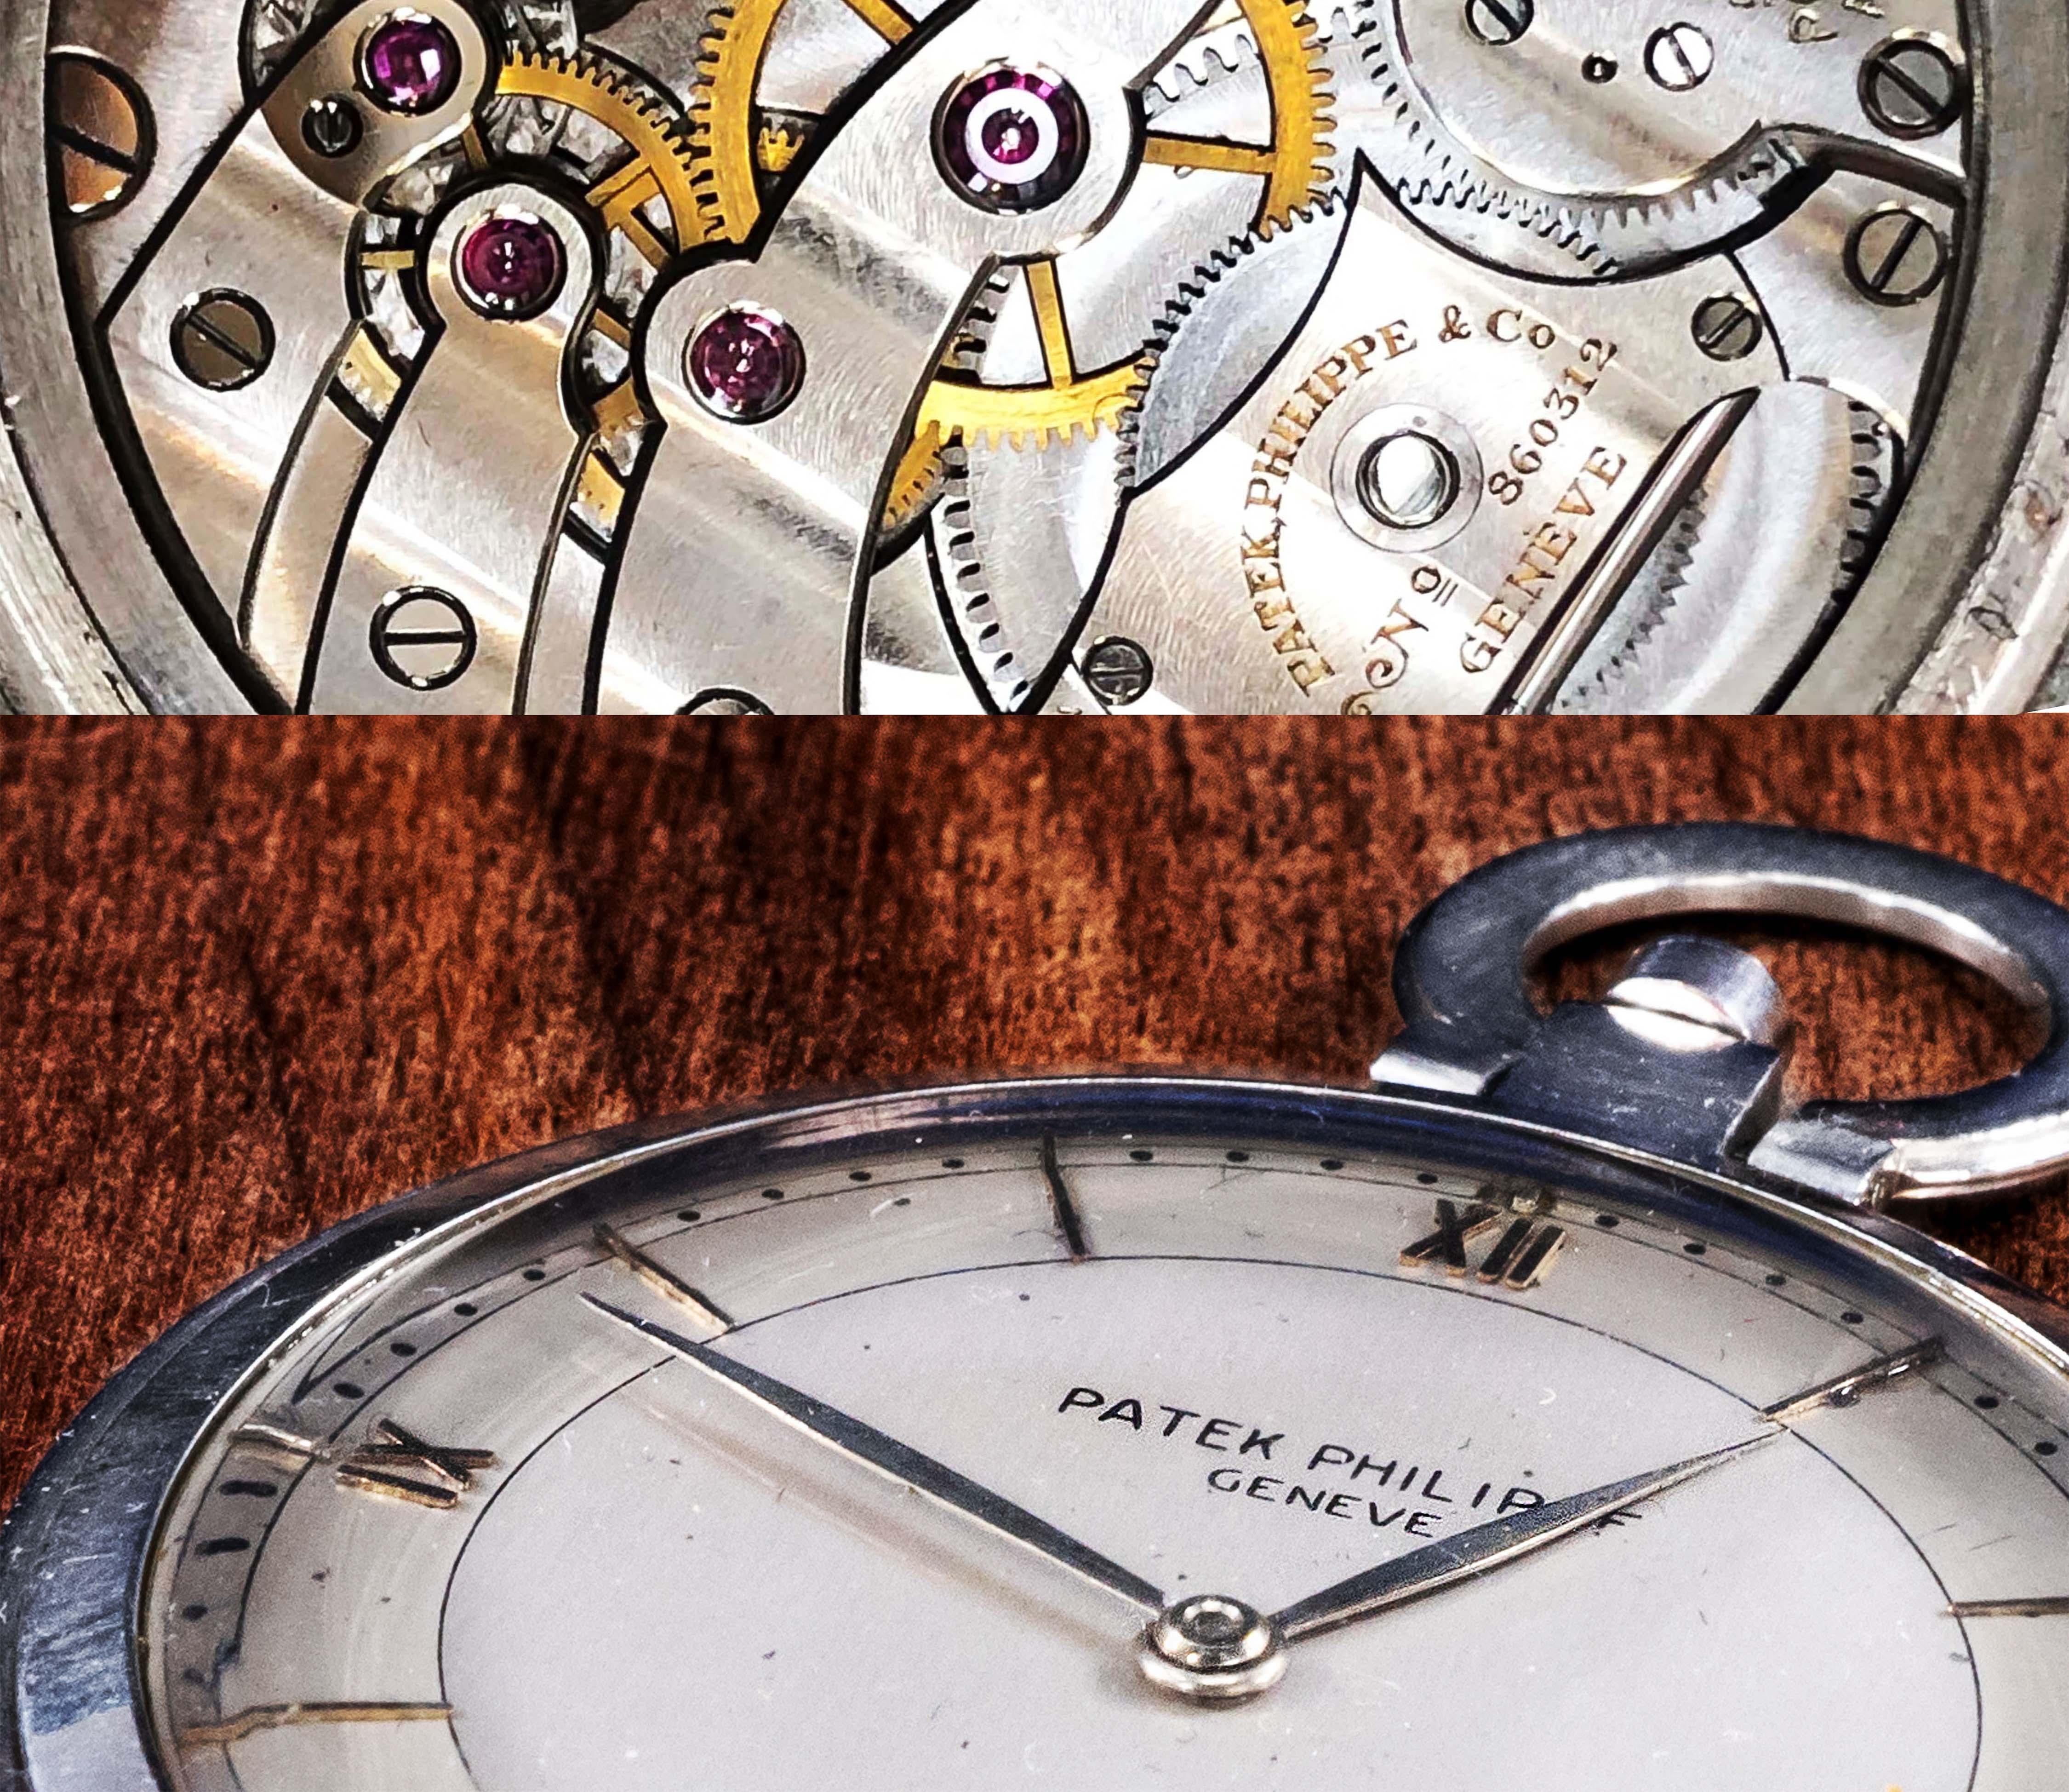 patek philippe double face watch price